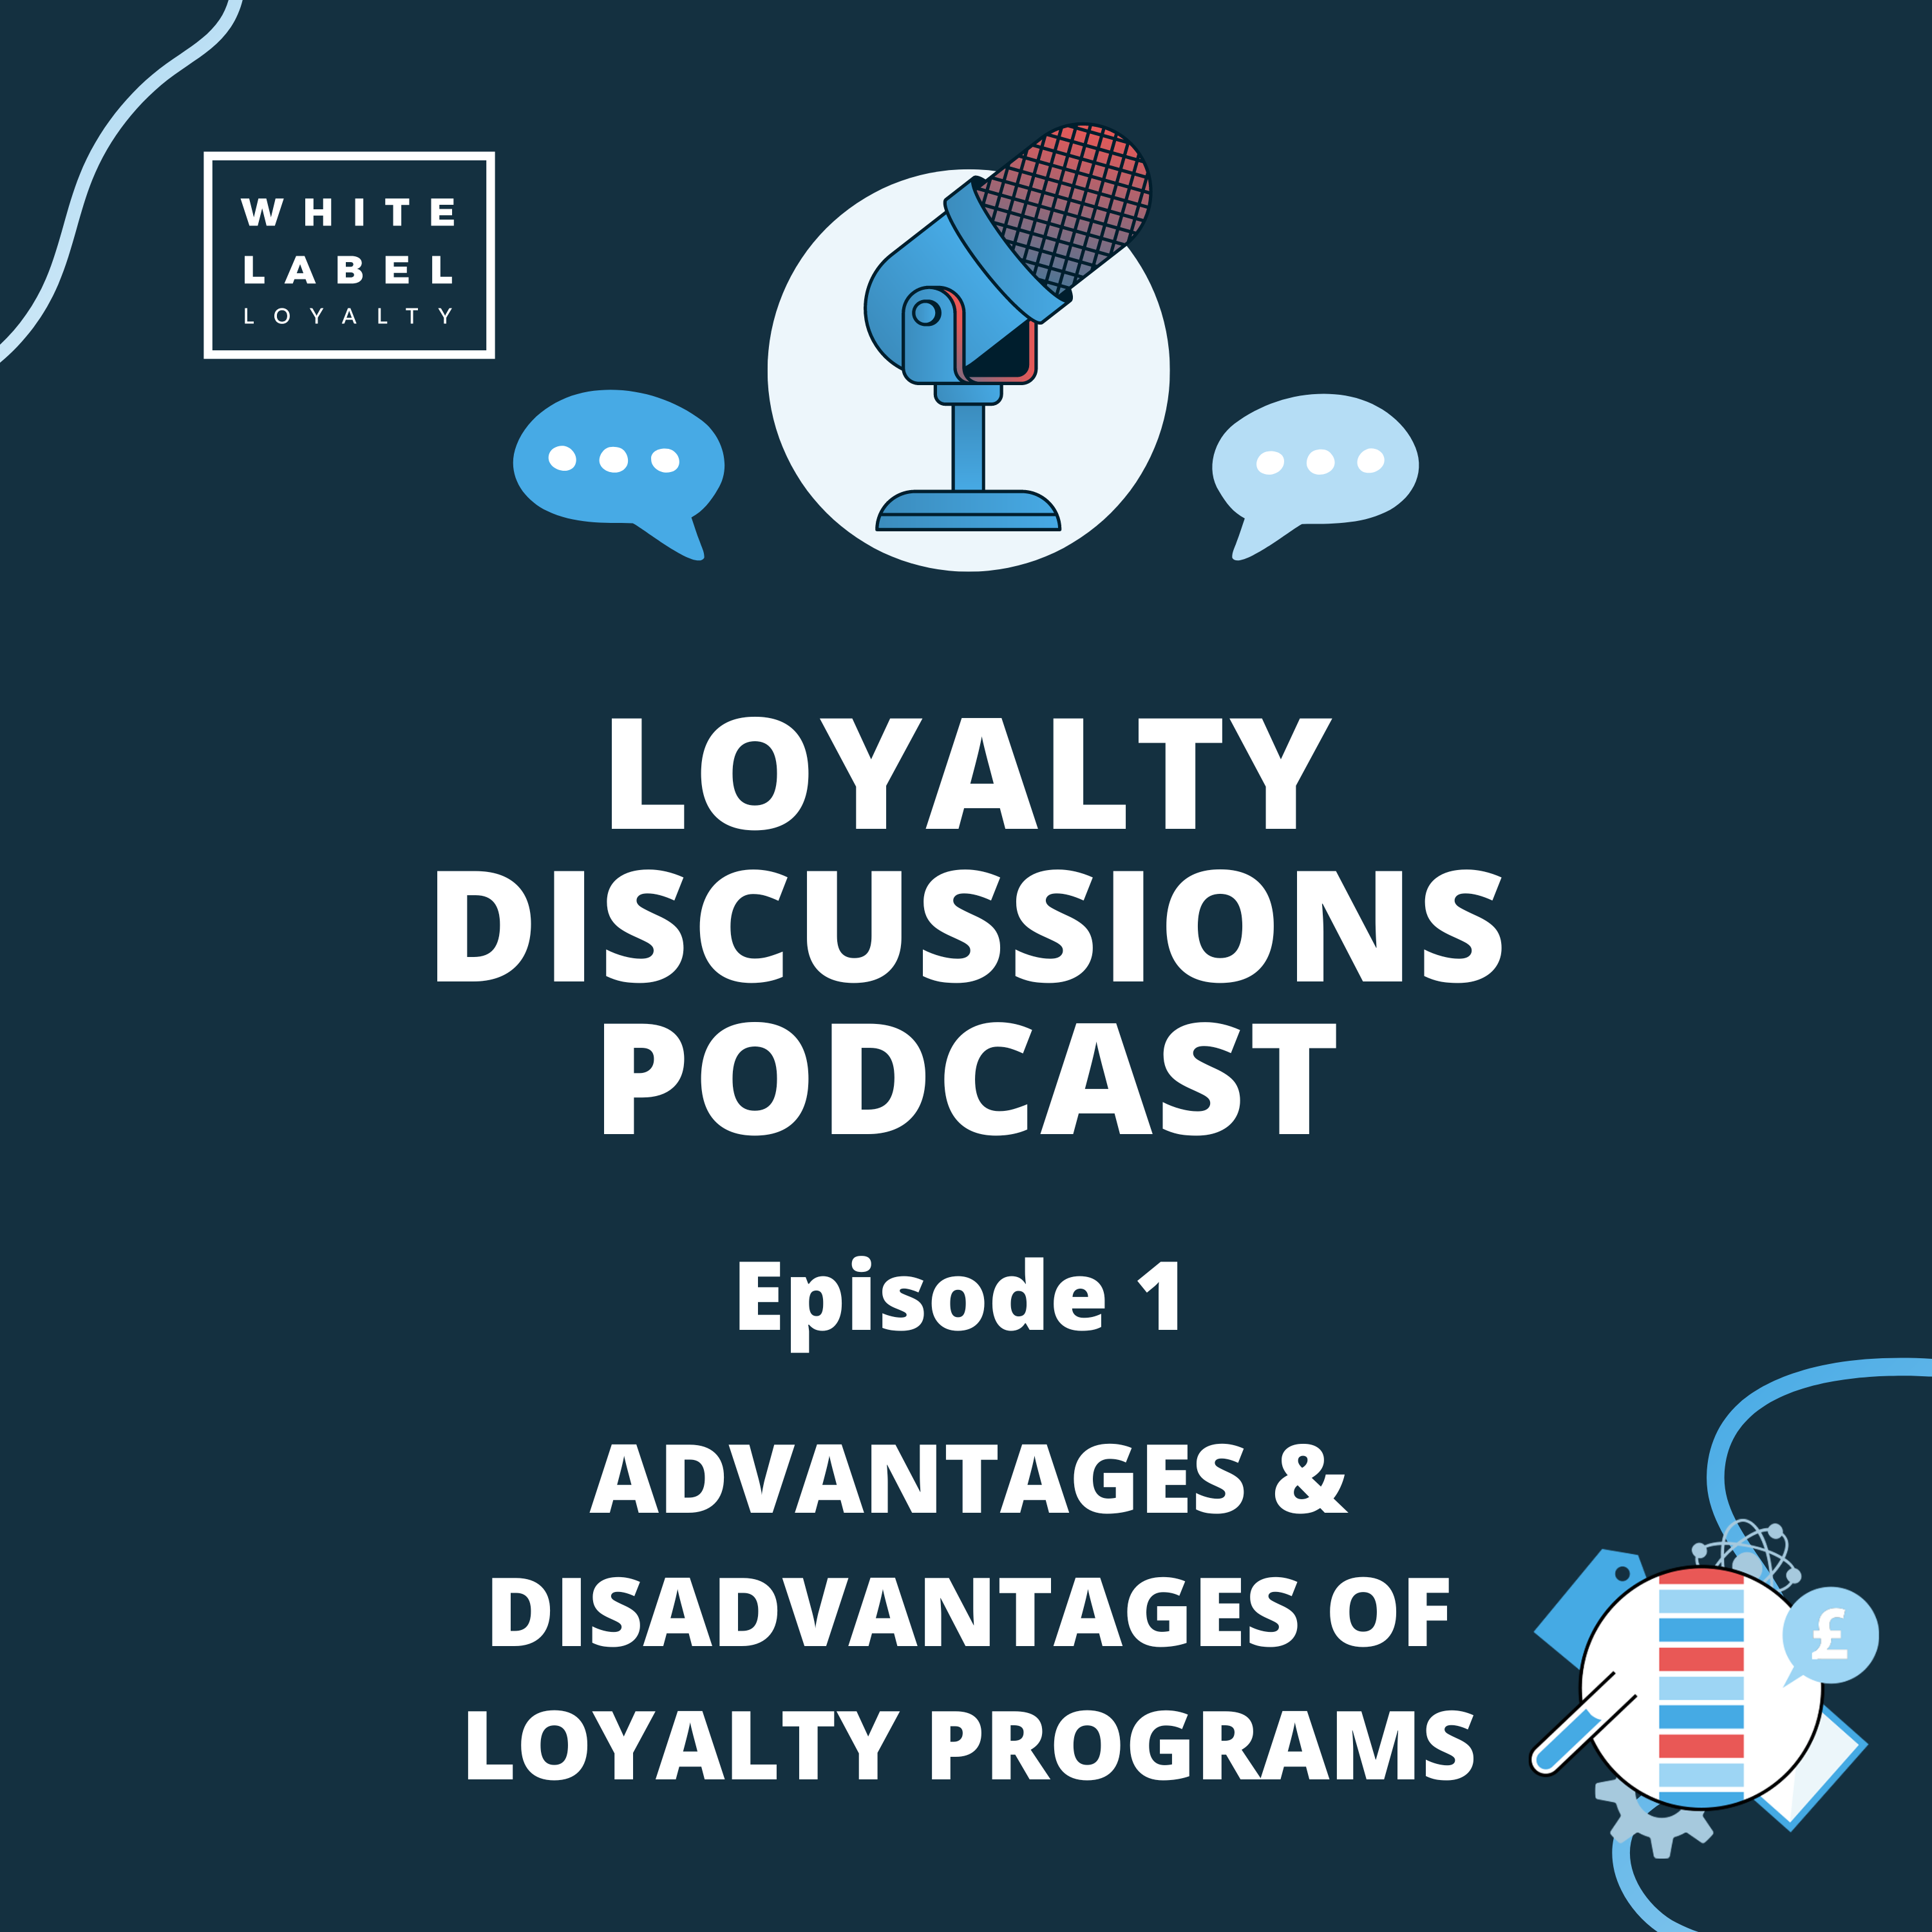 Exploring the Advantages and Disadvantages of Loyalty & Rewards Programs